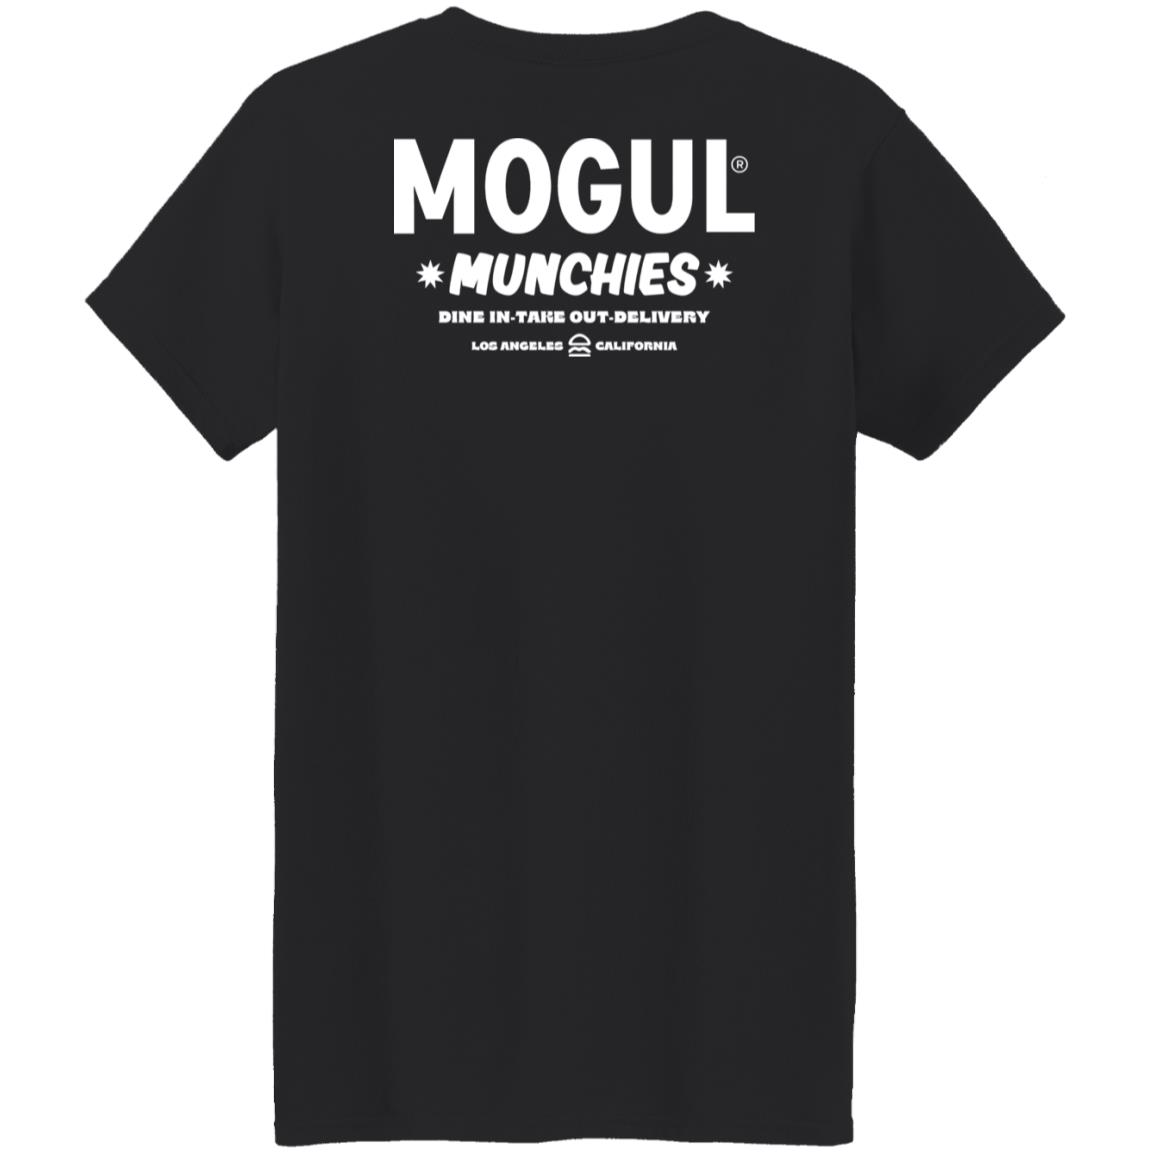 Mogul Munchies Shirt ludwig Mogul Munchies Dine In Take Out Delivery Los Angeles California Shirt